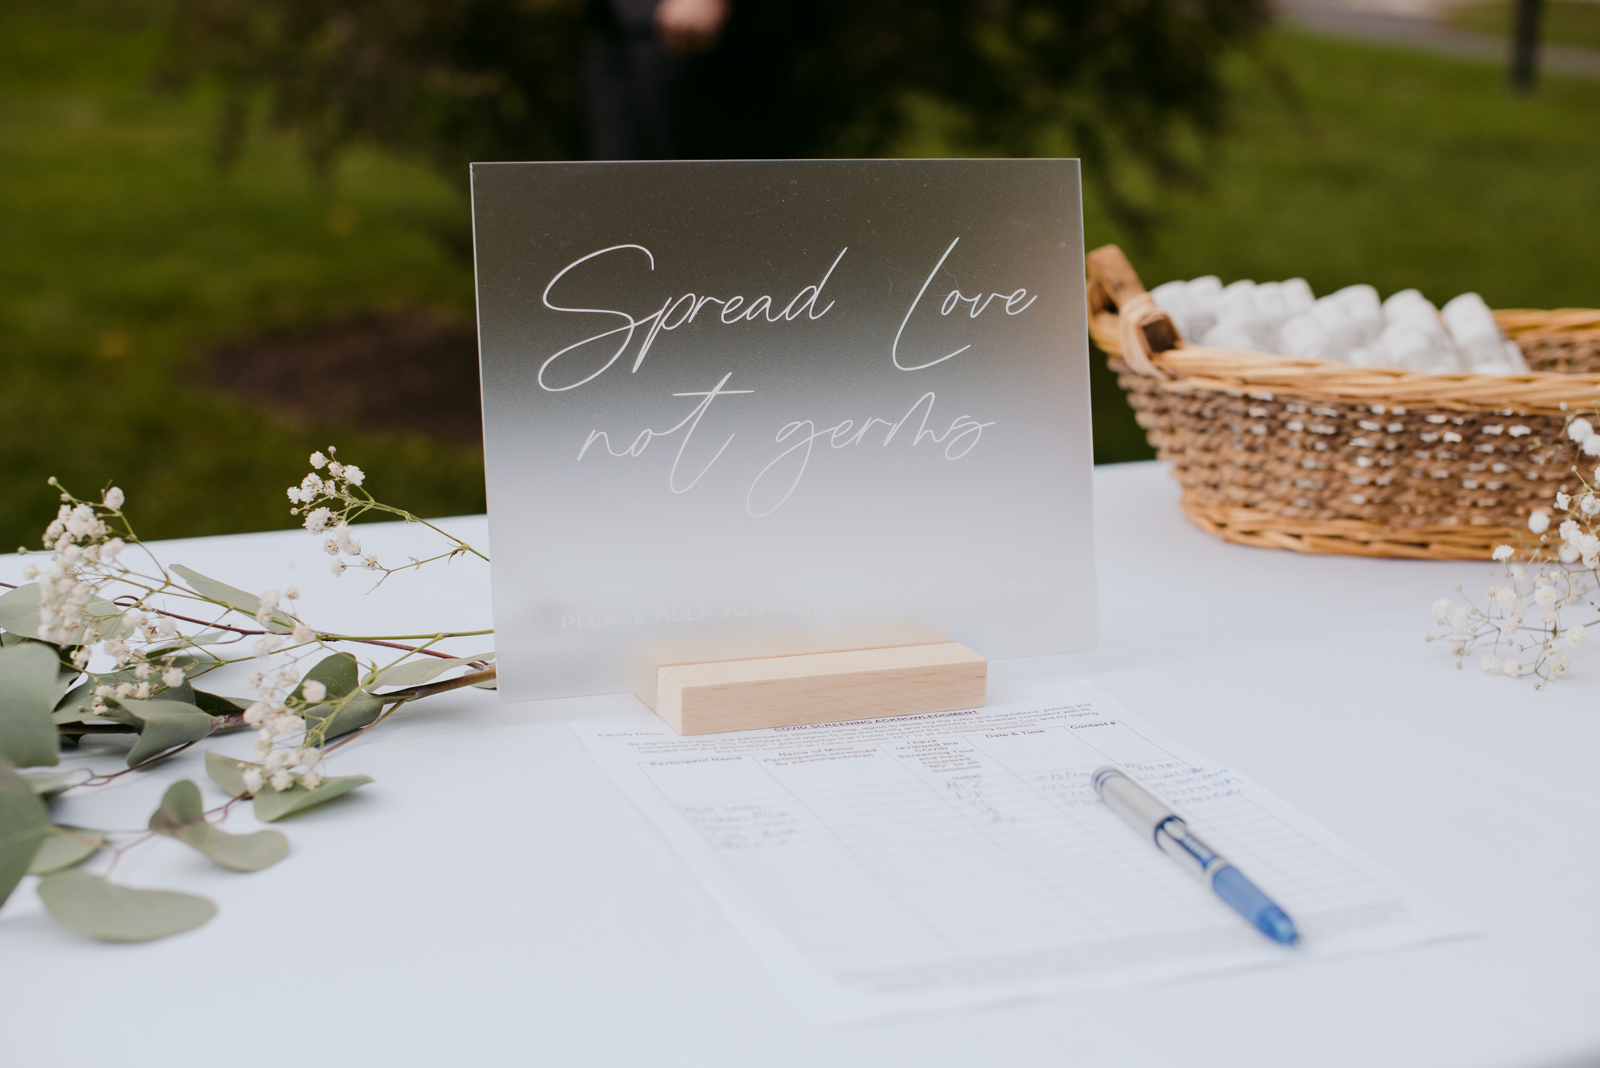 Spread love not germs sign at covid wedding reception